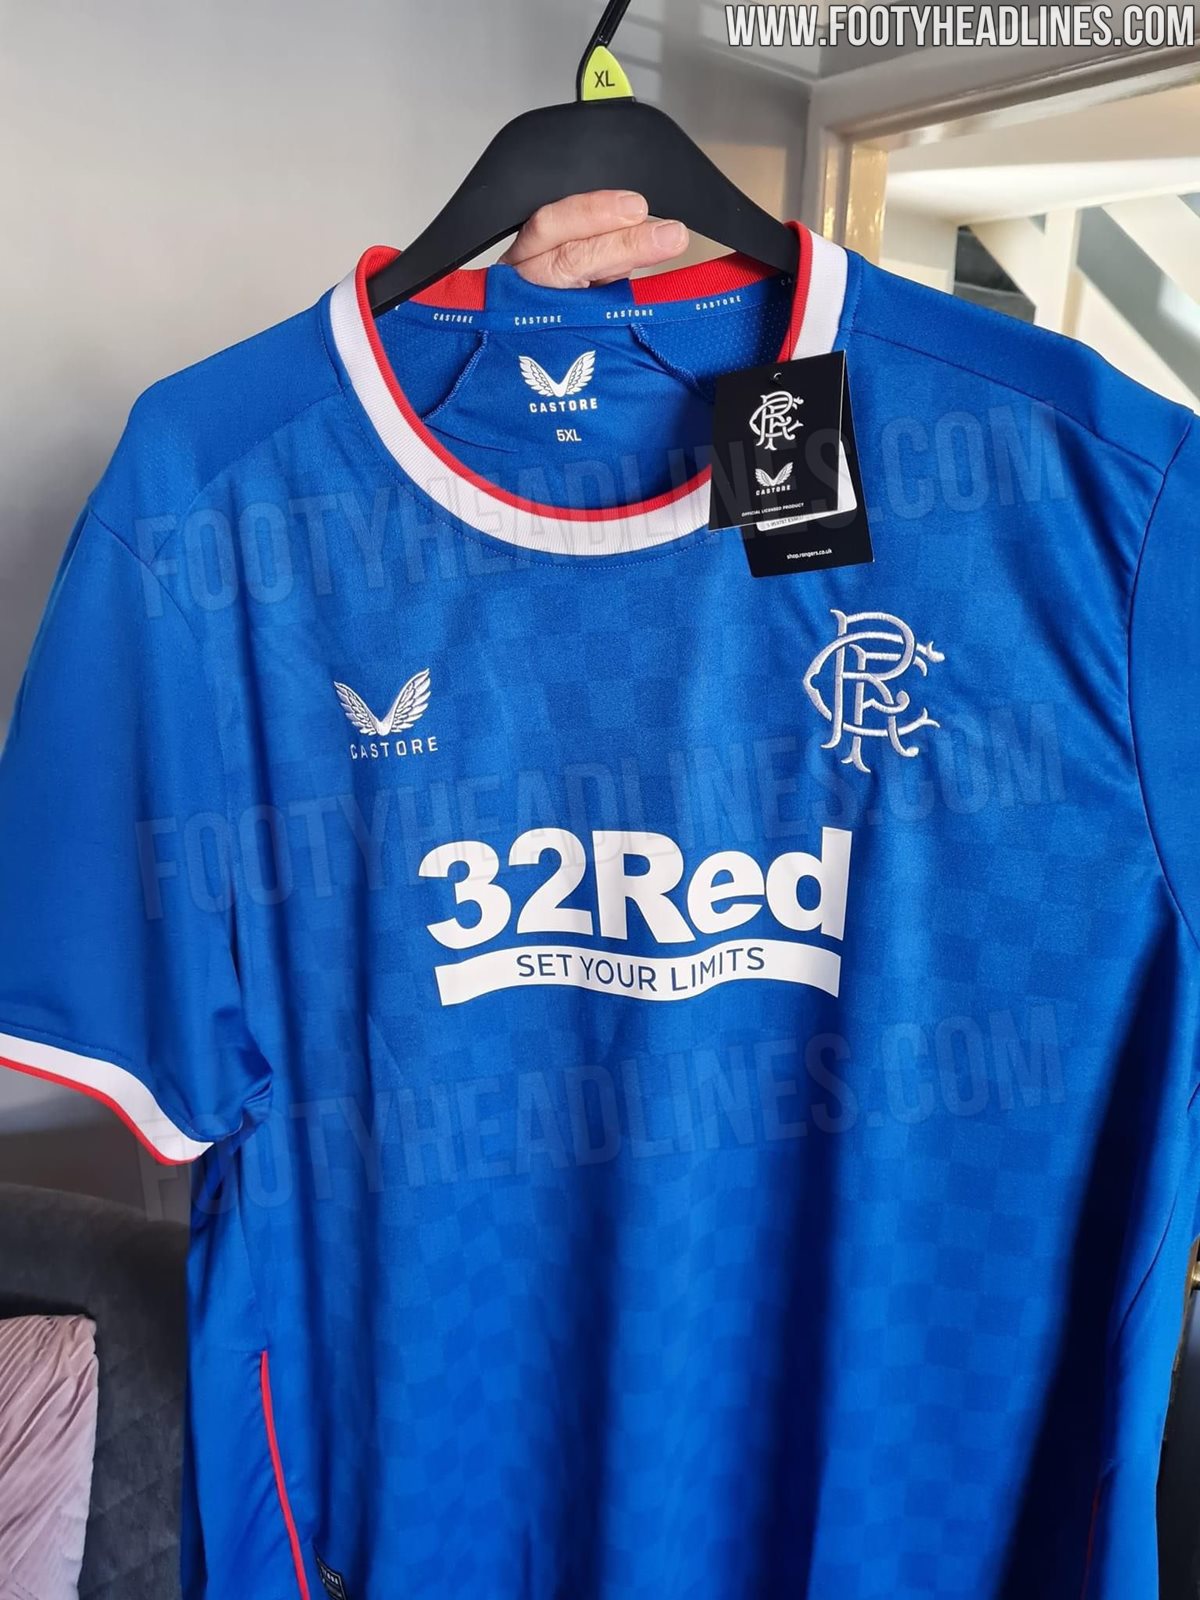 Rangers release 2022-23 home shirt inspired by past kits